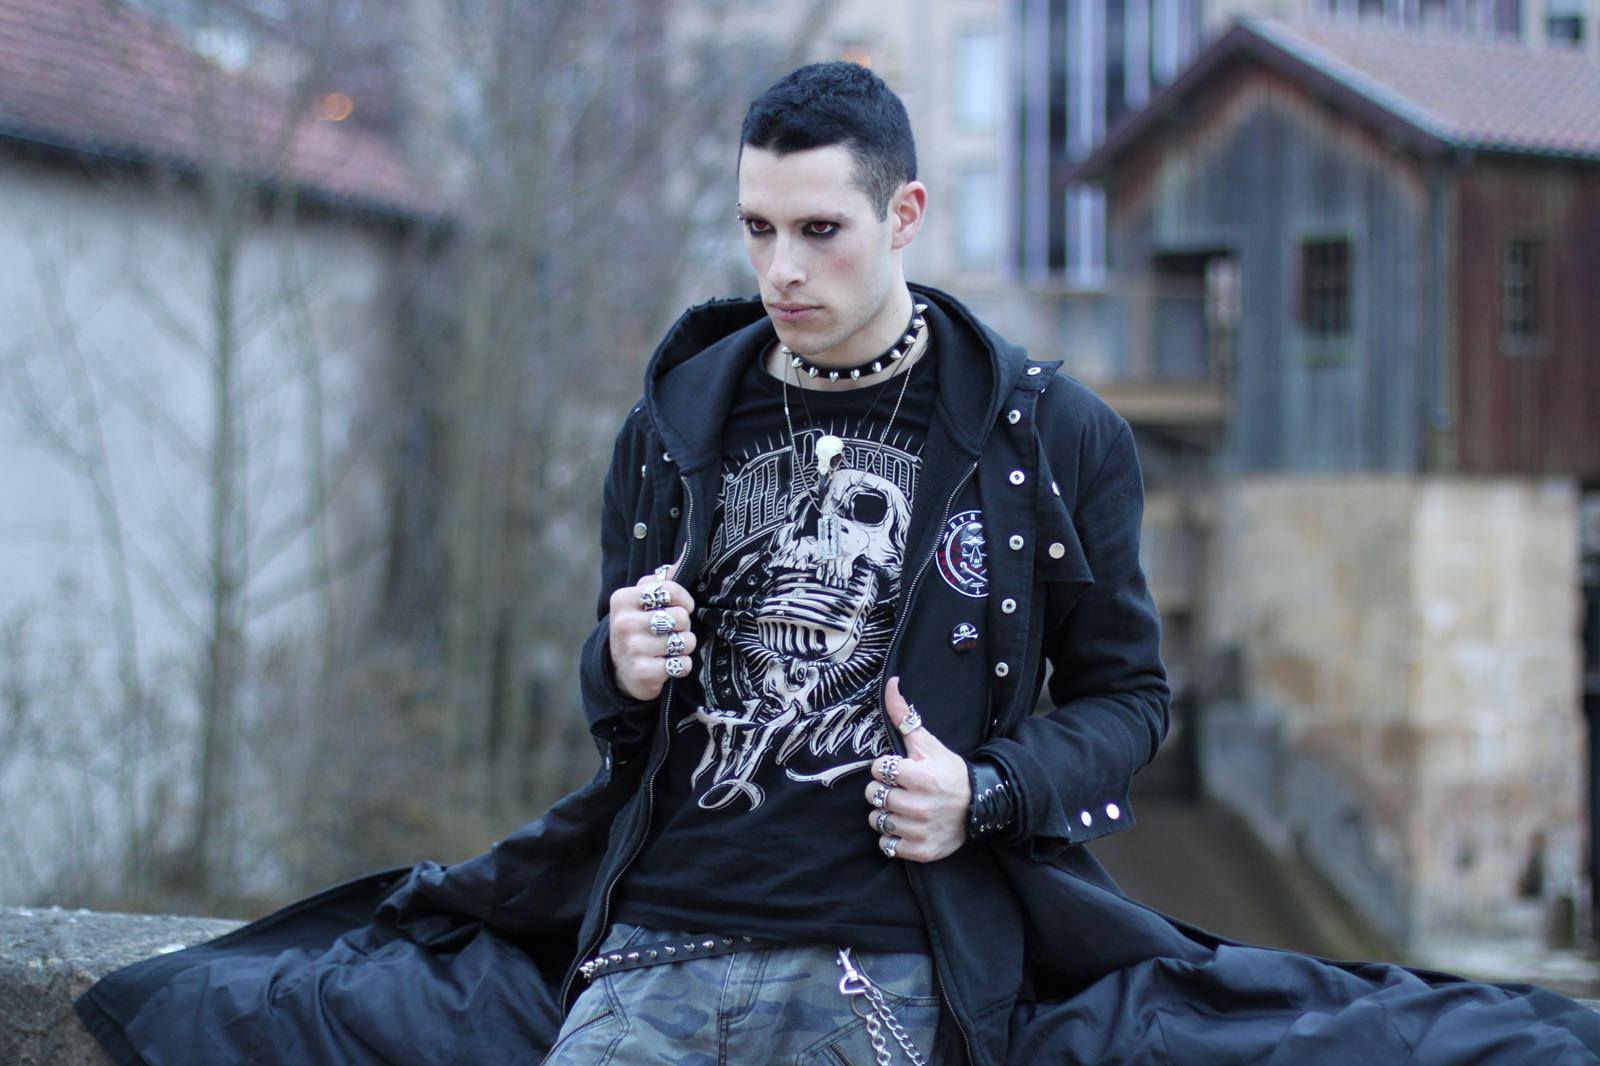 Raven skull necklace being worn by a man as gothic style jewelry